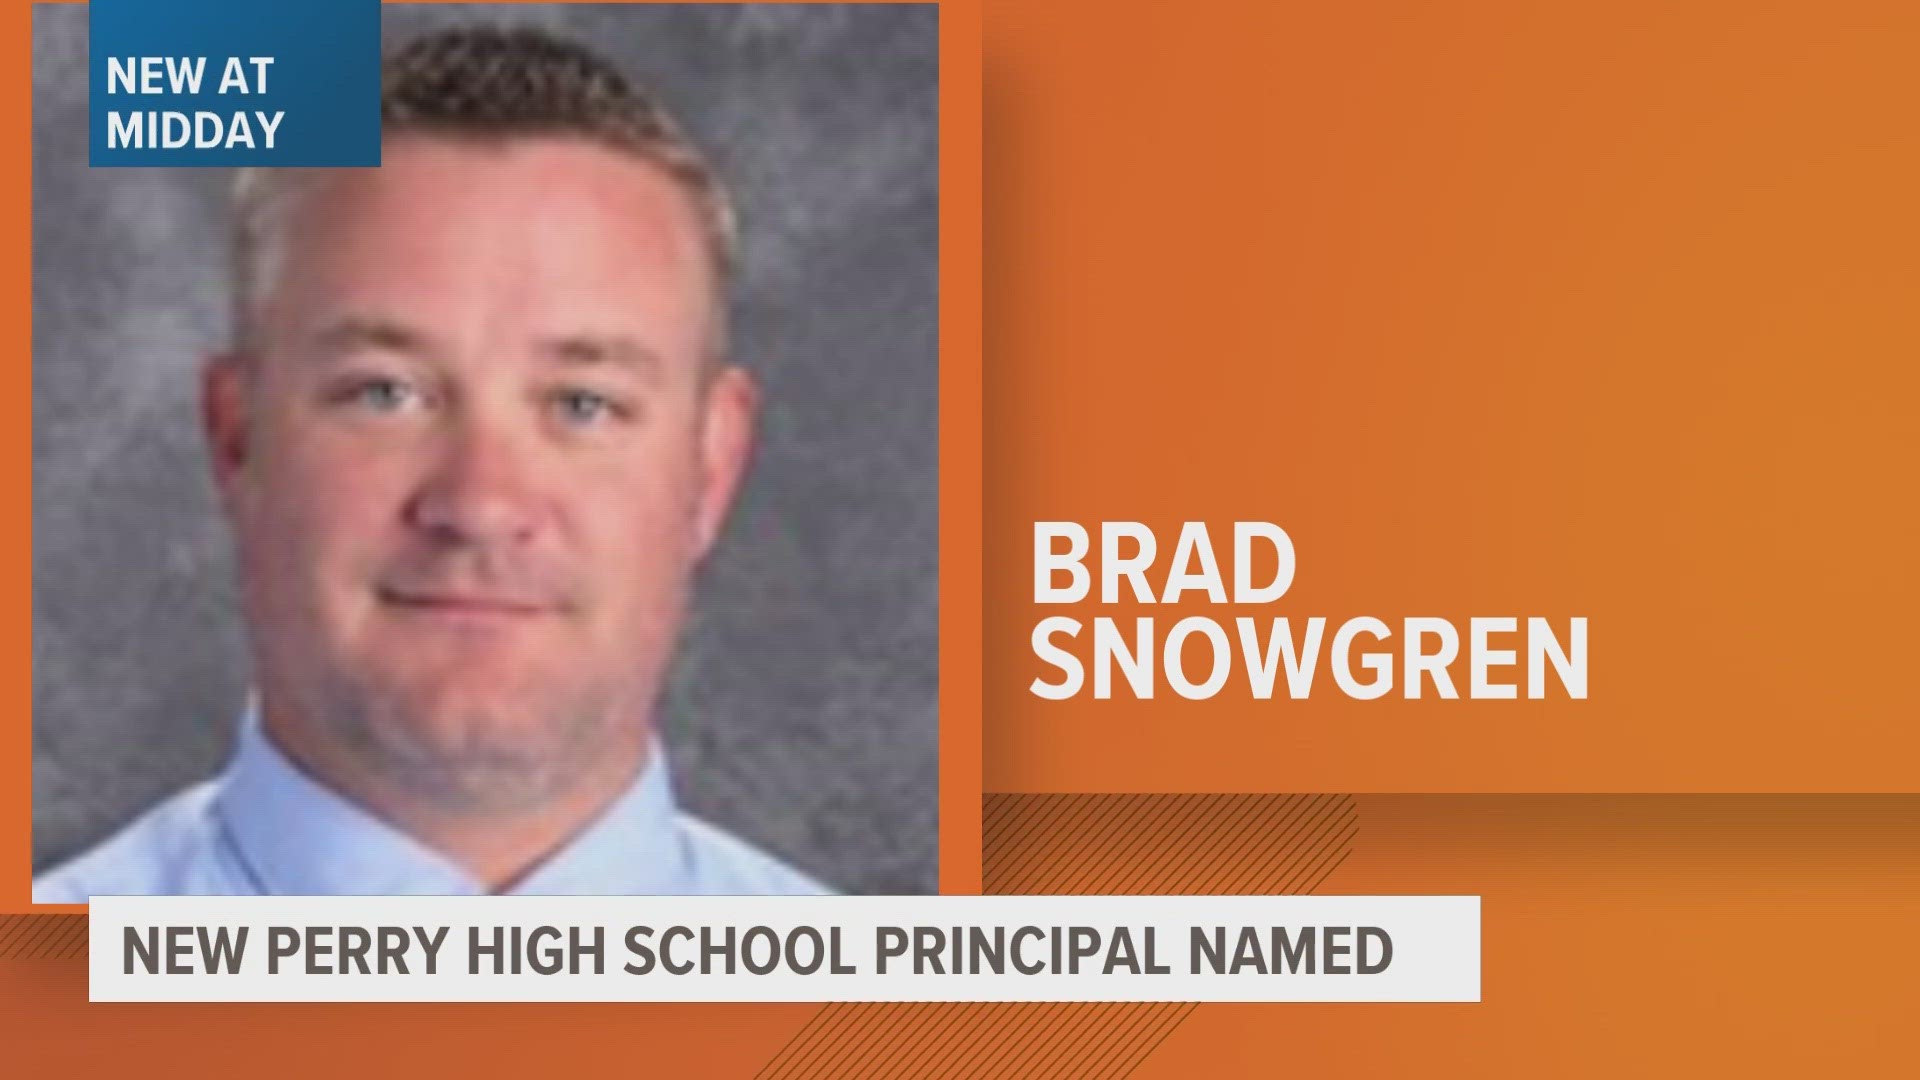 Snowgren succeeds Principal Dan Marburger, who lost his life in the shooting on Jan. 4 after putting himself in harm's way to protect students.